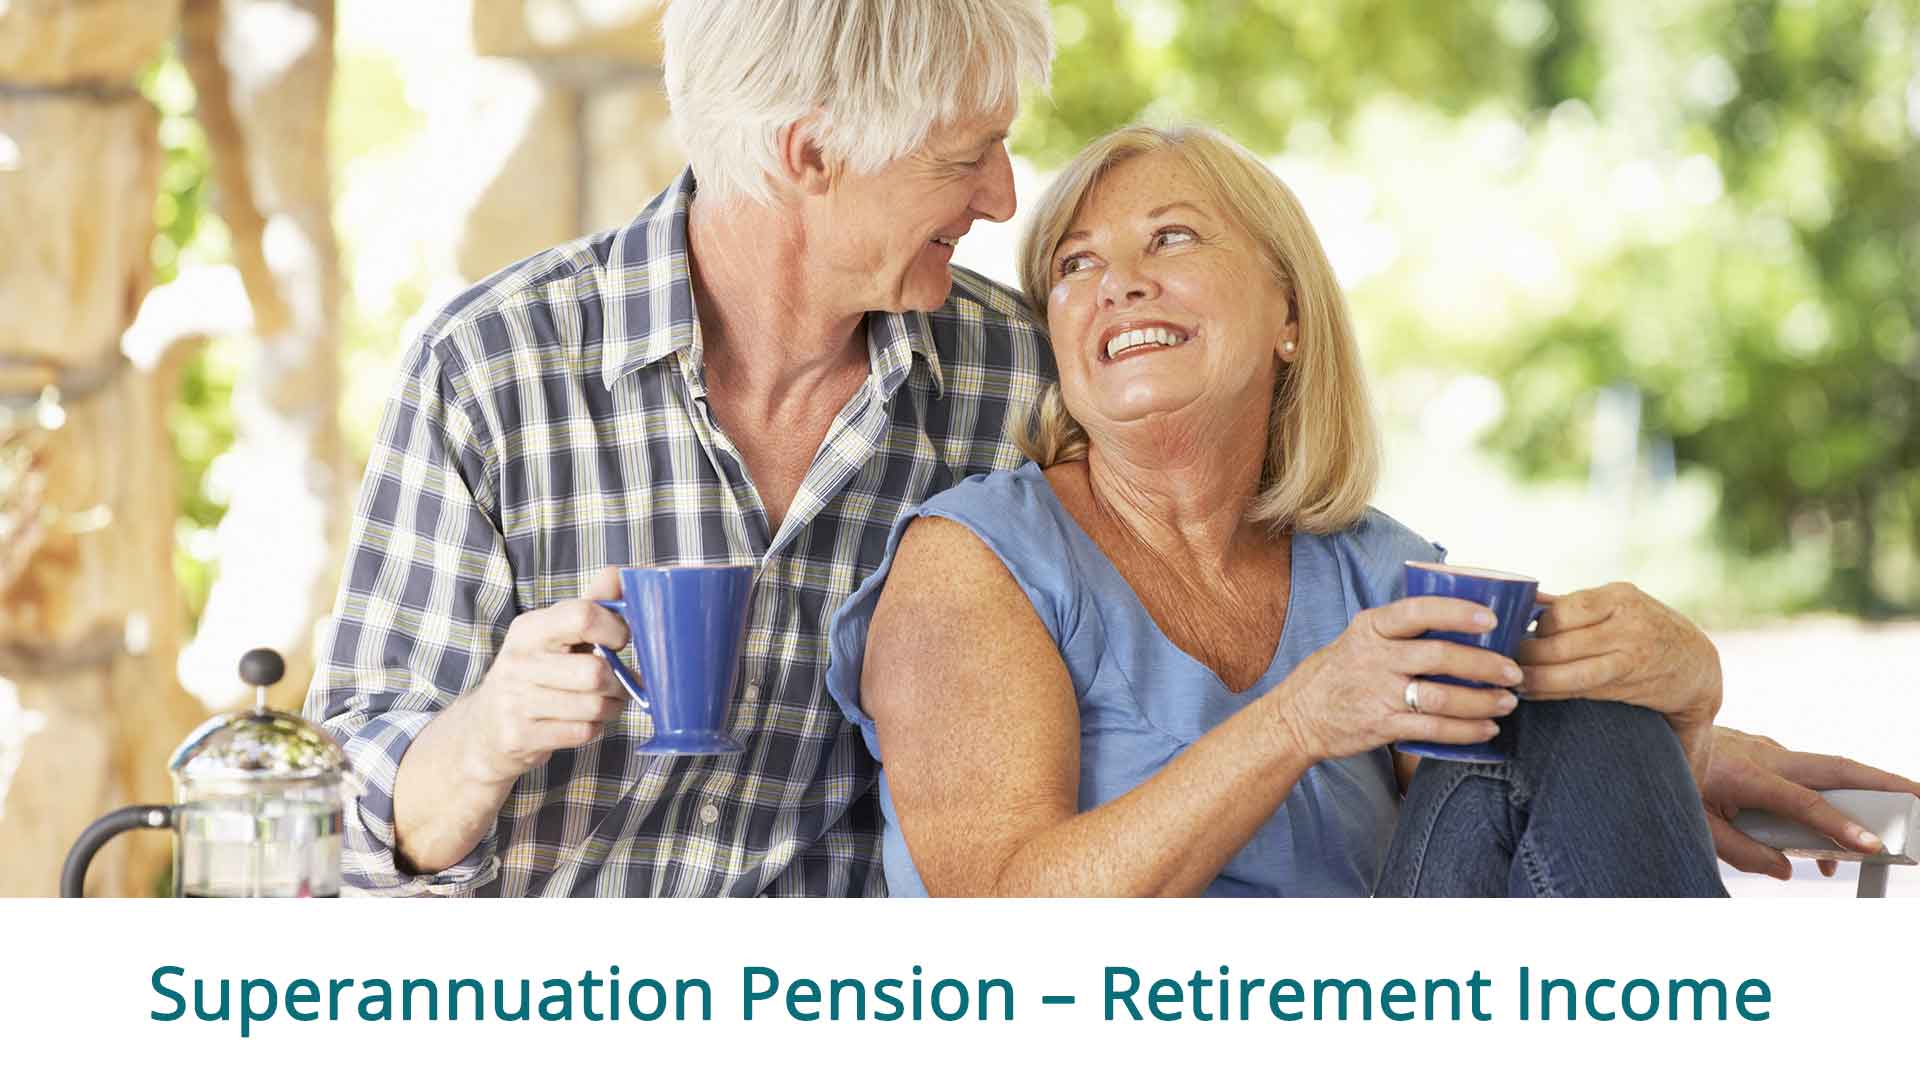 Murray-Mallee-Financial-Planning-Advice-4-Superannuation-Pension-Retirement-Income